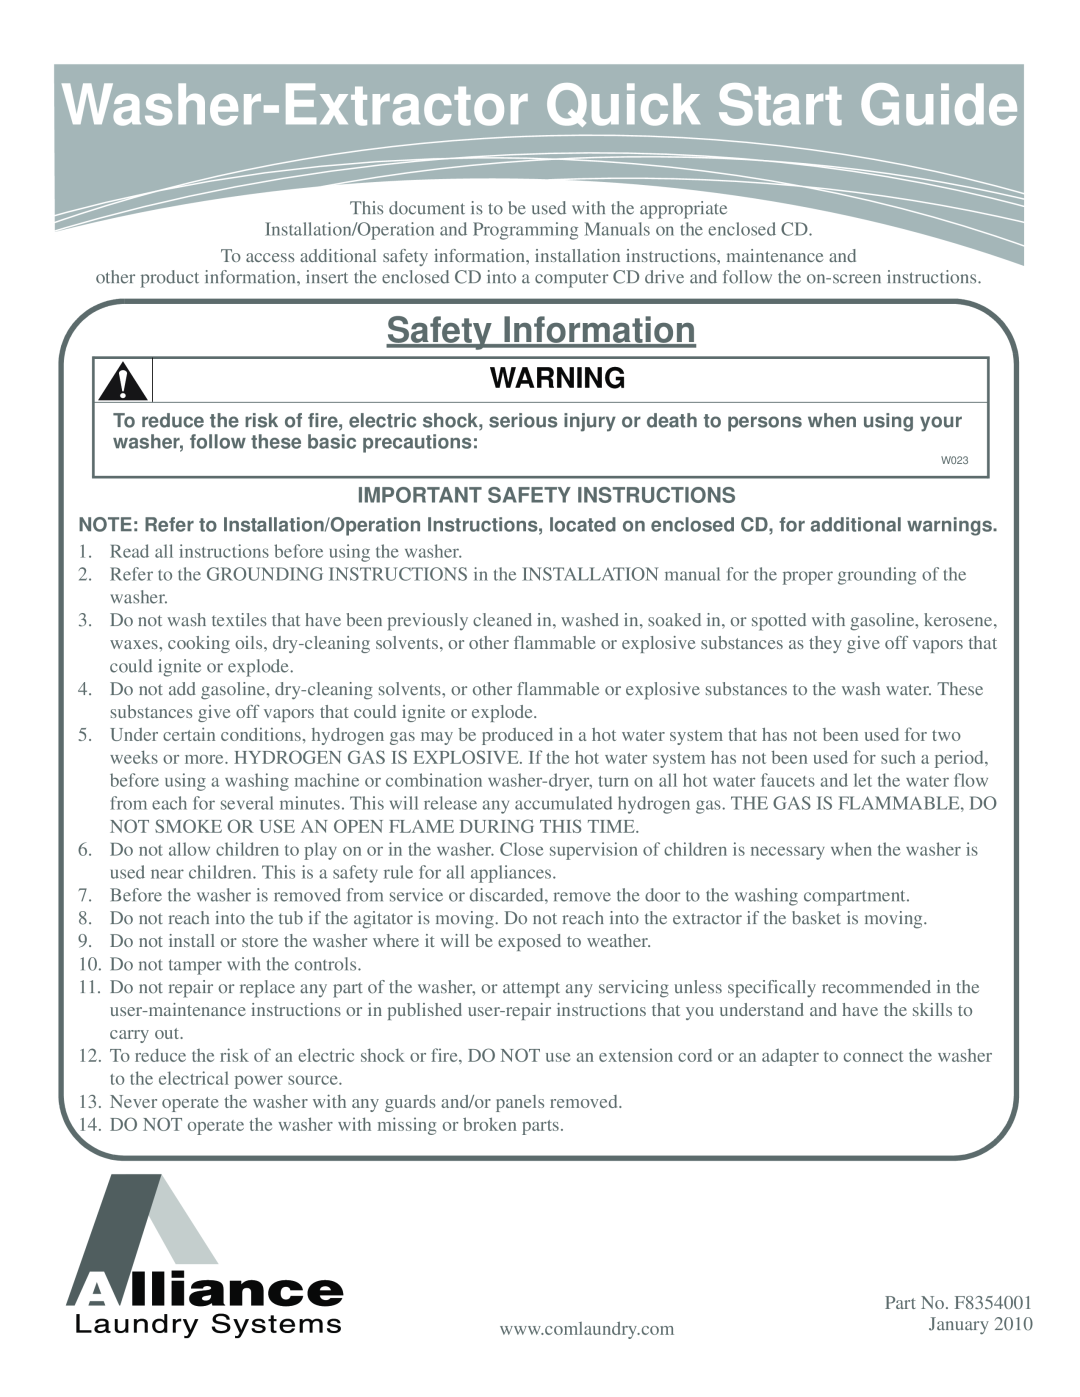 Alliance Laundry Systems F8354001 important safety instructions Washer-Extractor Quick Start Guide, Safety Information 